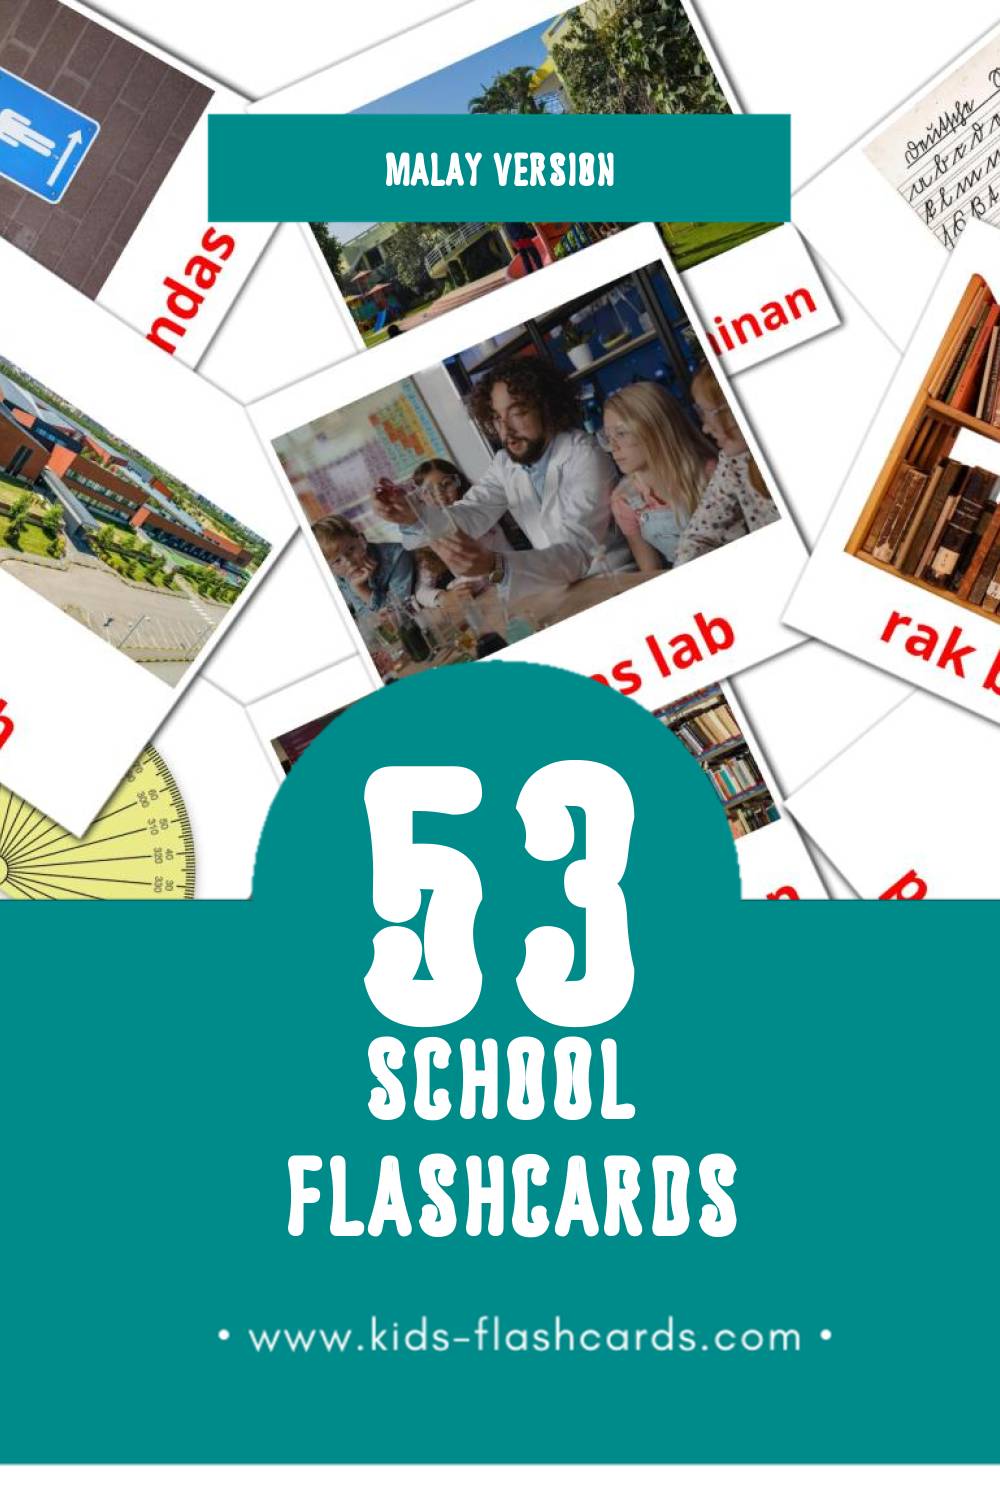 Visual Sekolah Flashcards for Toddlers (53 cards in Malay)